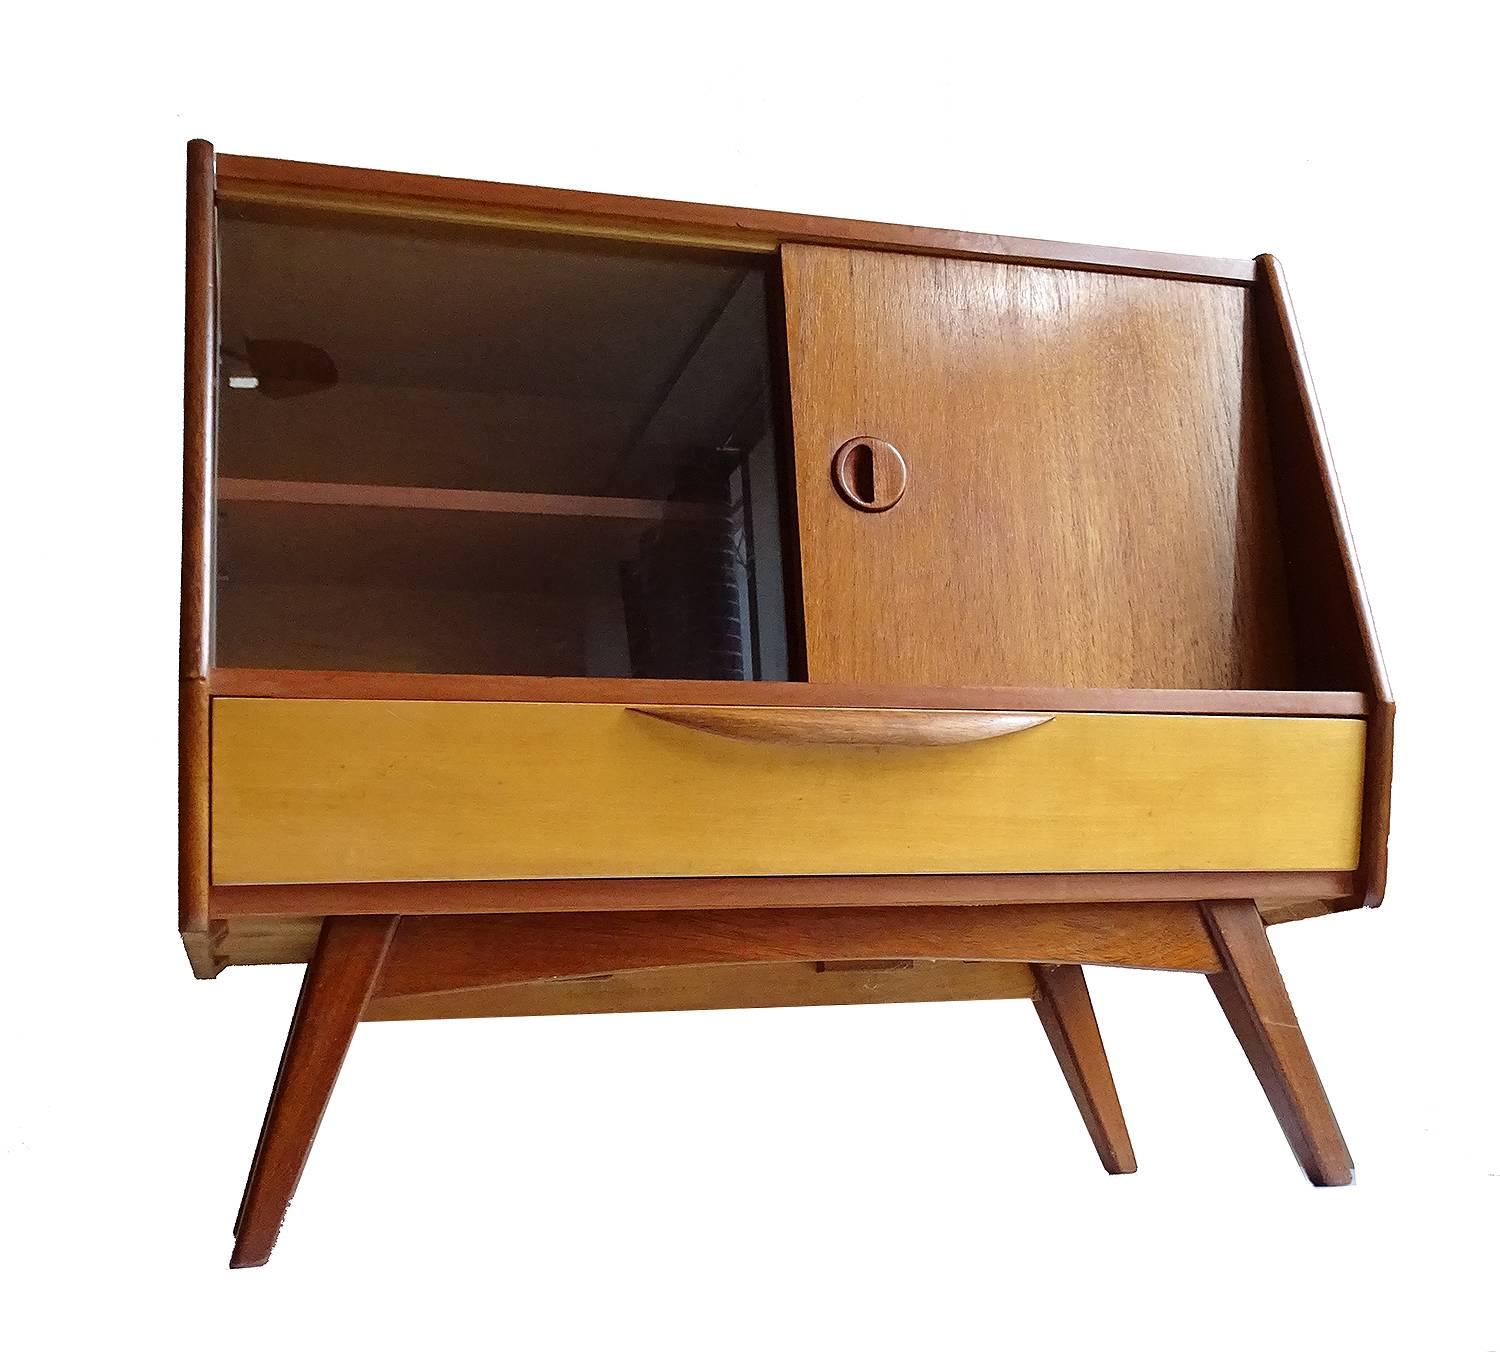 Middle size cabinet / sideboard, Danish Mid-Century Modern design from the Netherlands,
design by Louis van Teffelen, angular design with spayed legs, one large drawer, organic shaped handles.
Dimensions:
H 27.96 in. x W 31.5 in. x D 16.15 in.
H